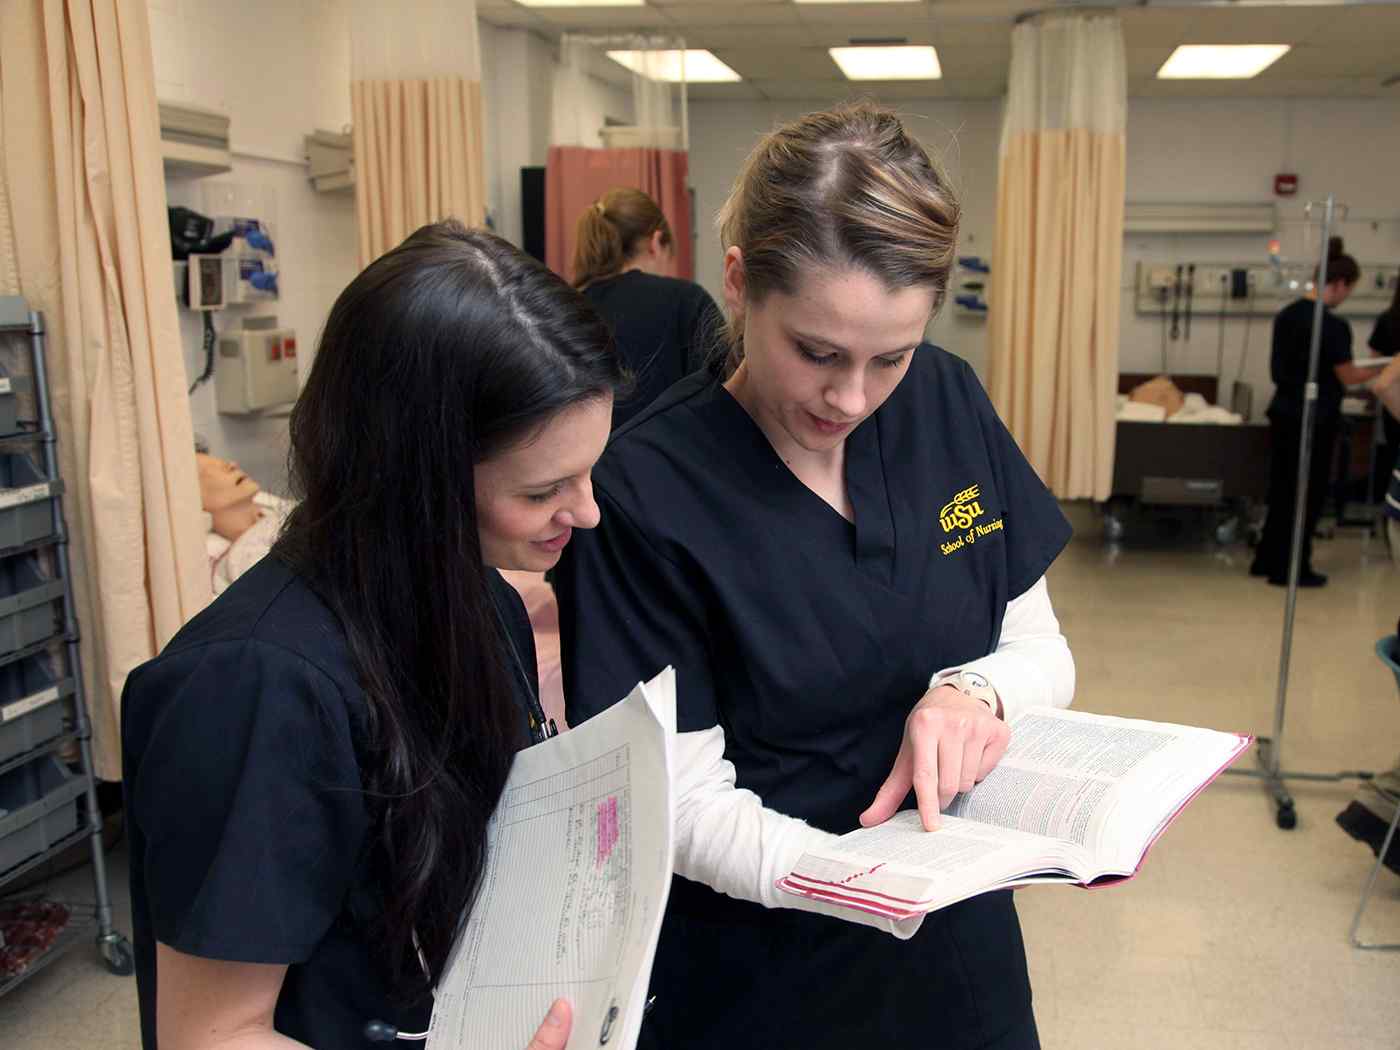 Two nursing students review a chart